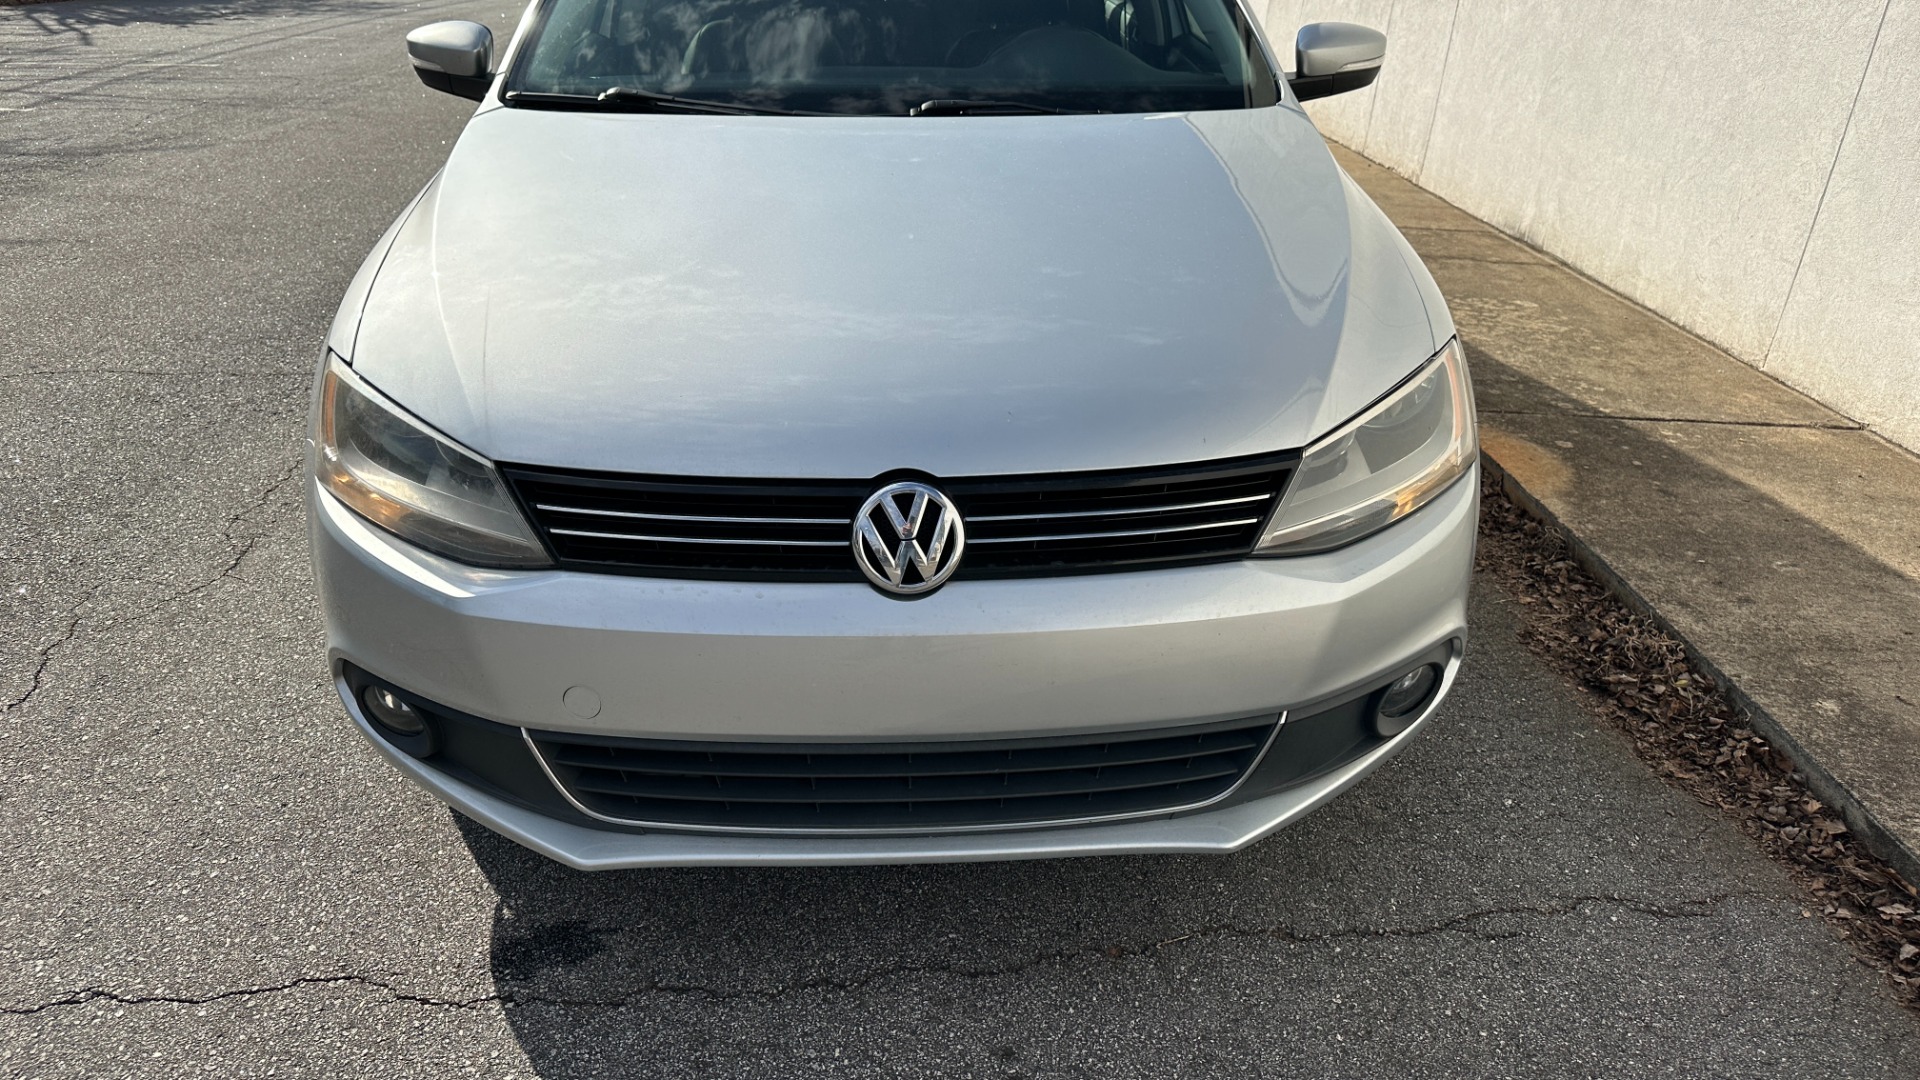 Used 2011 Volkswagen Jetta Sedan SEL / LEATHER / SUNROOF / BLUETOOTH for sale Sold at Formula Imports in Charlotte NC 28227 7